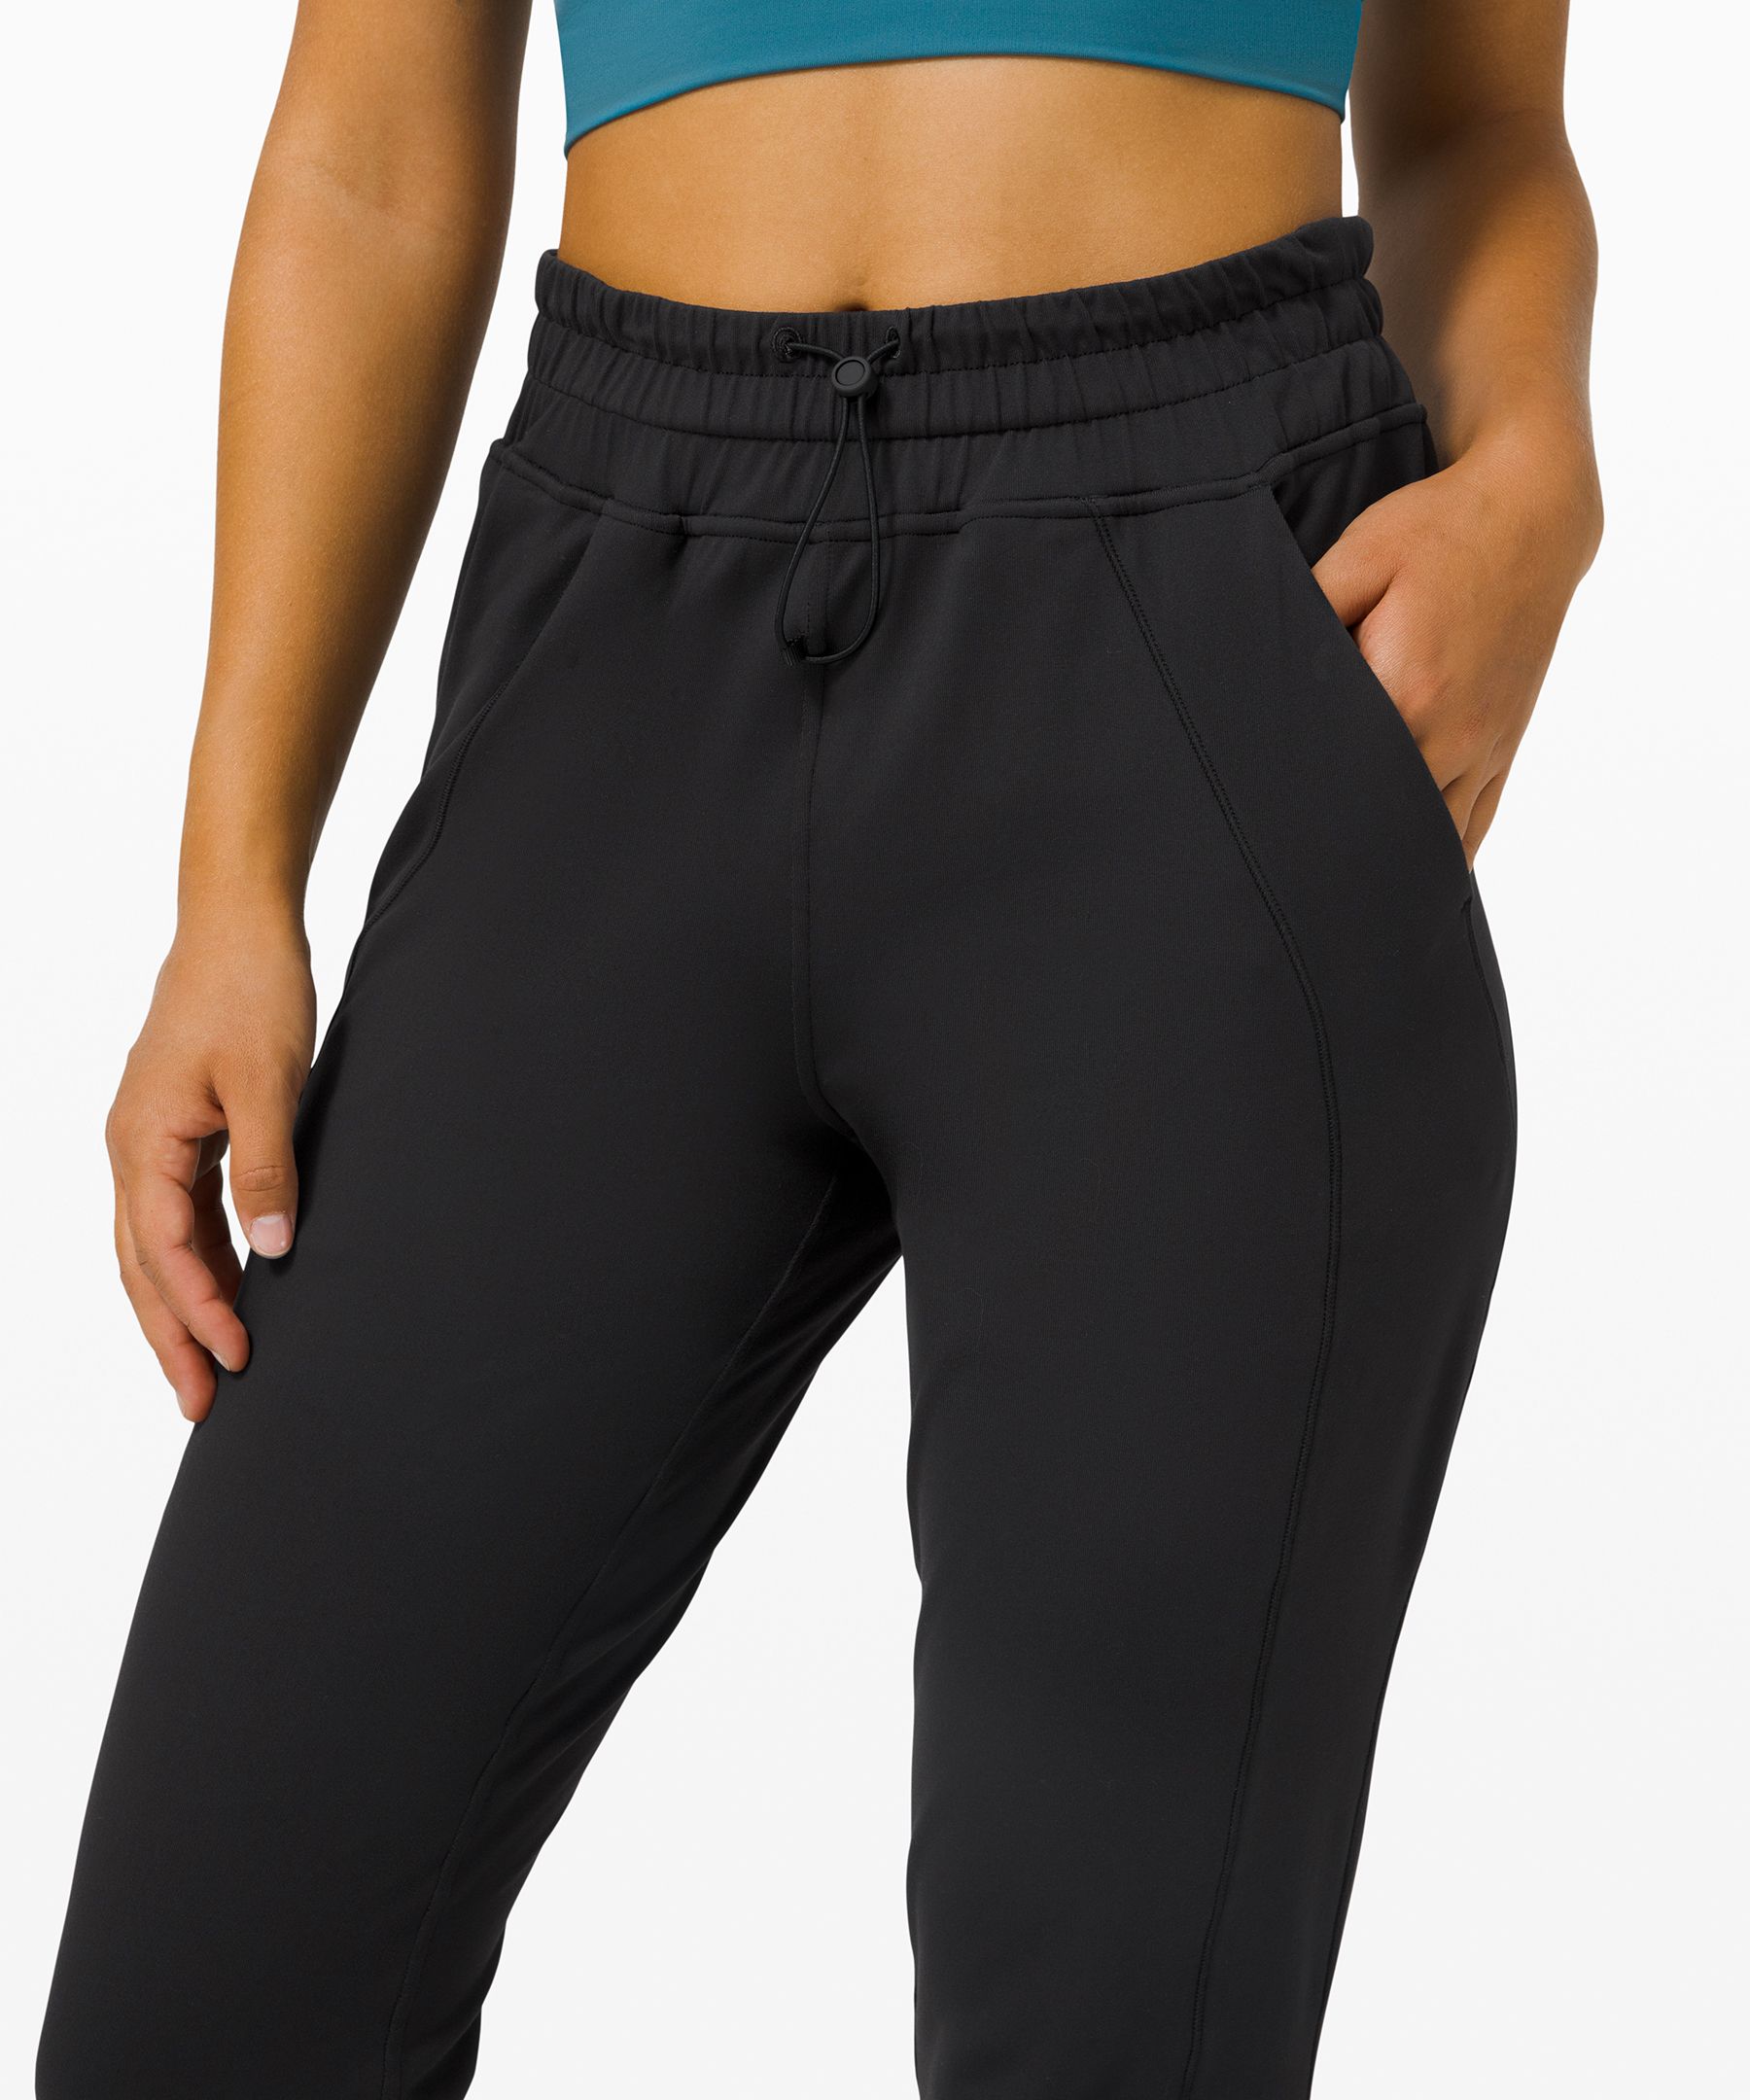 Cinched Joggers